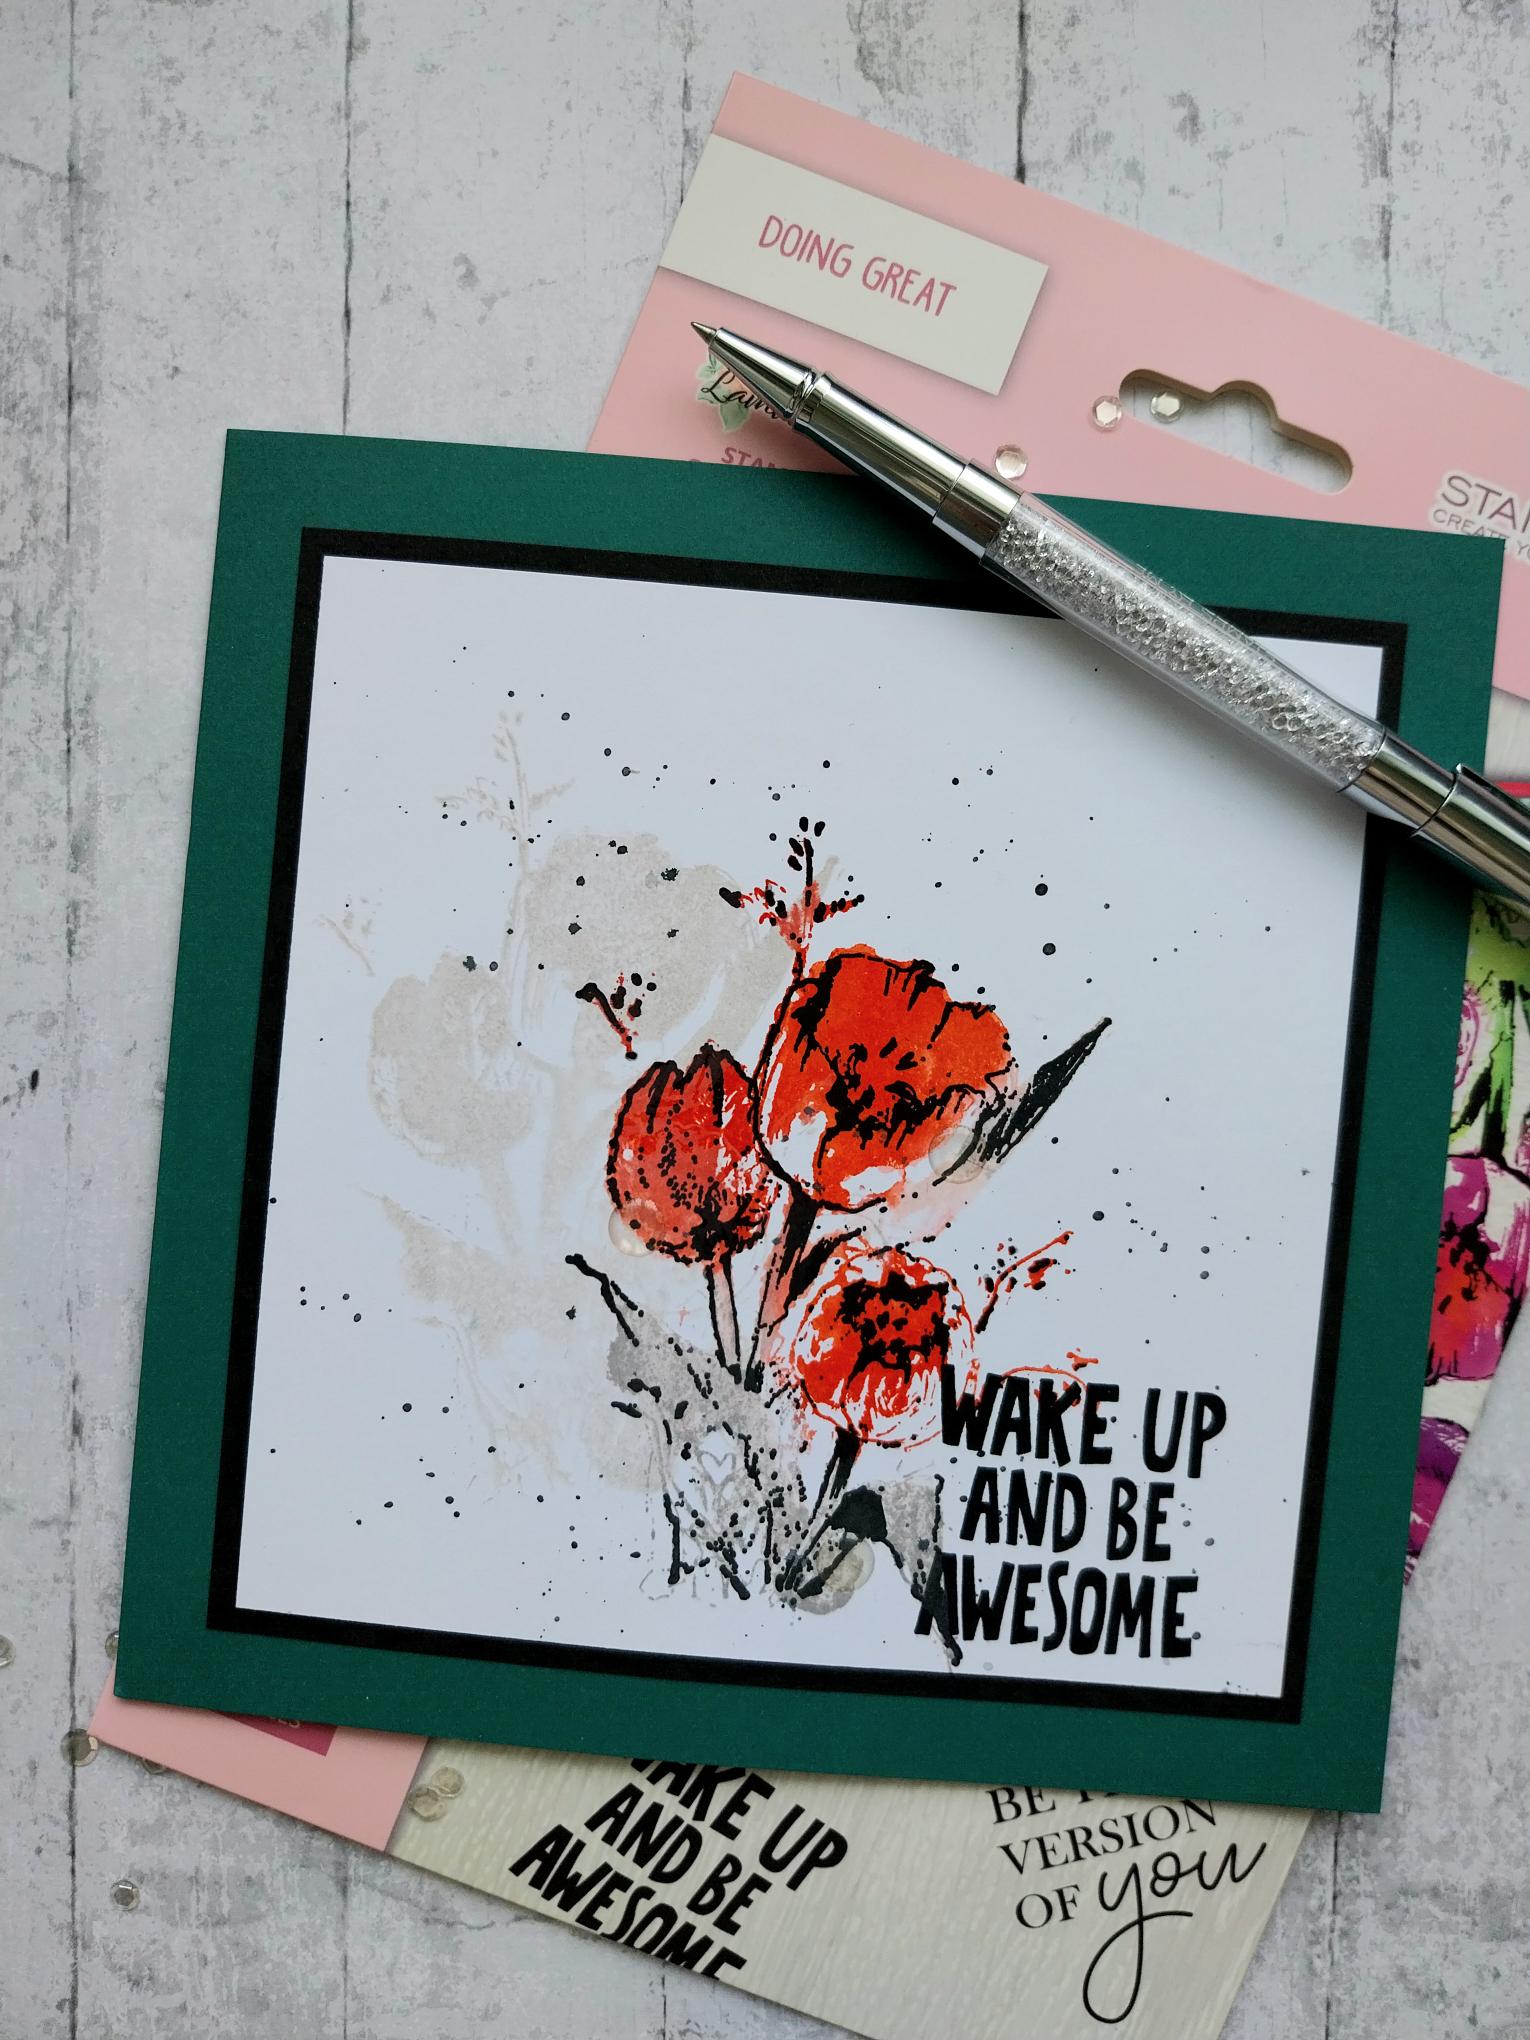 Wake Up And Be Awesome